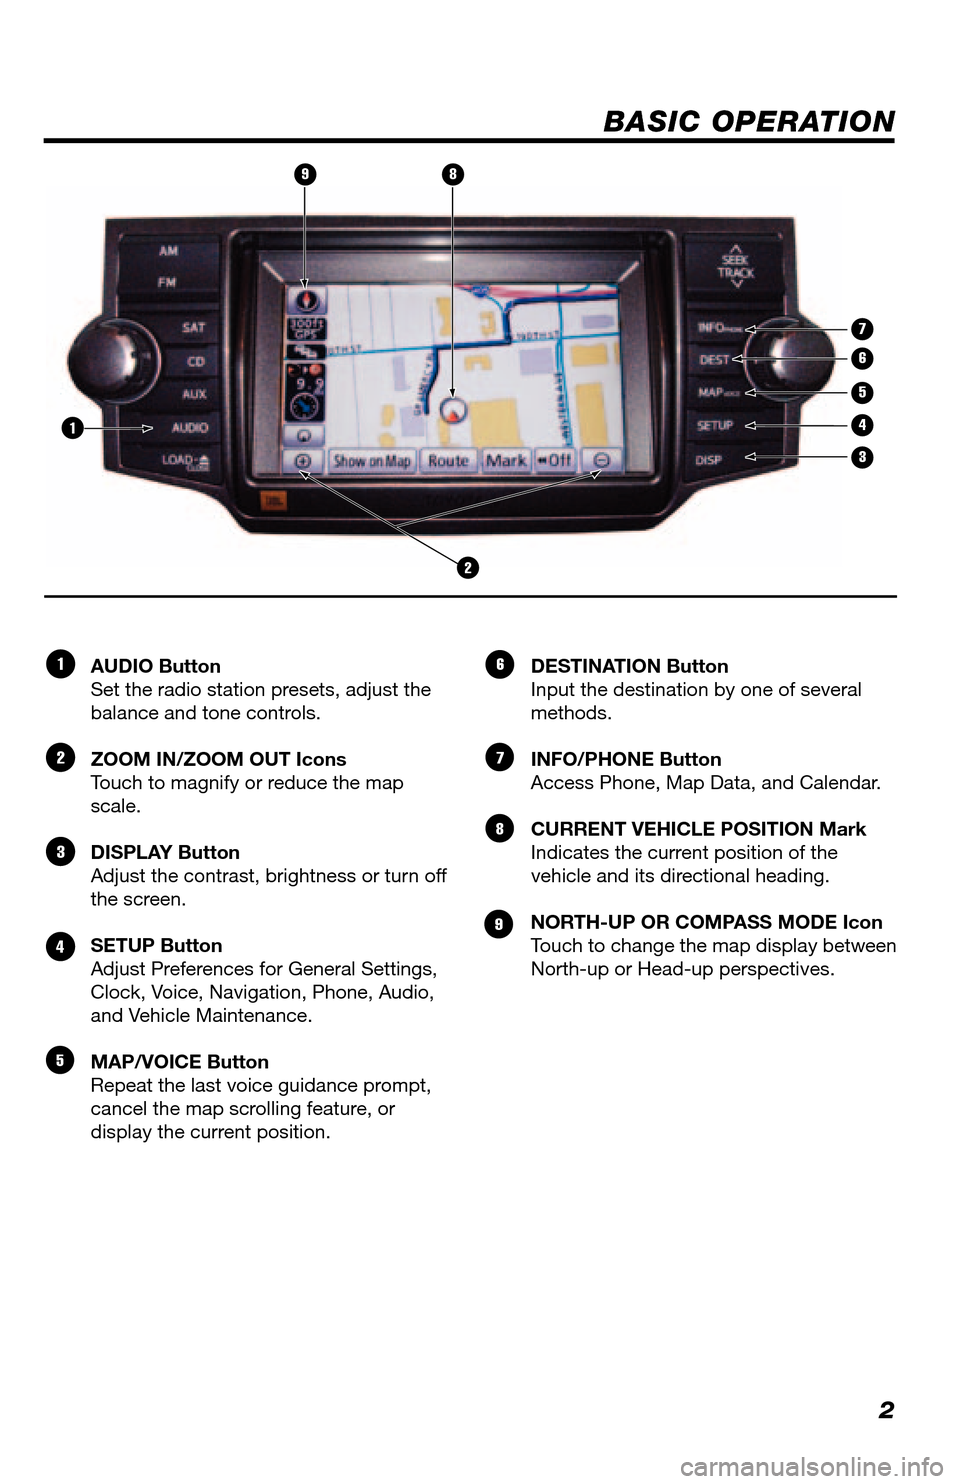 TOYOTA 4RUNNER 2013 N280 / 5.G Navigation Manual 2
BASIC OPERATION
AUDIO Button
Set the radio station presets, adjust the 
balance and tone controls. 
ZOOM IN/ZOOM OUT Icons
Touch to magnify or reduce the map 
scale. 
DISPLAY Button
Adjust the contr